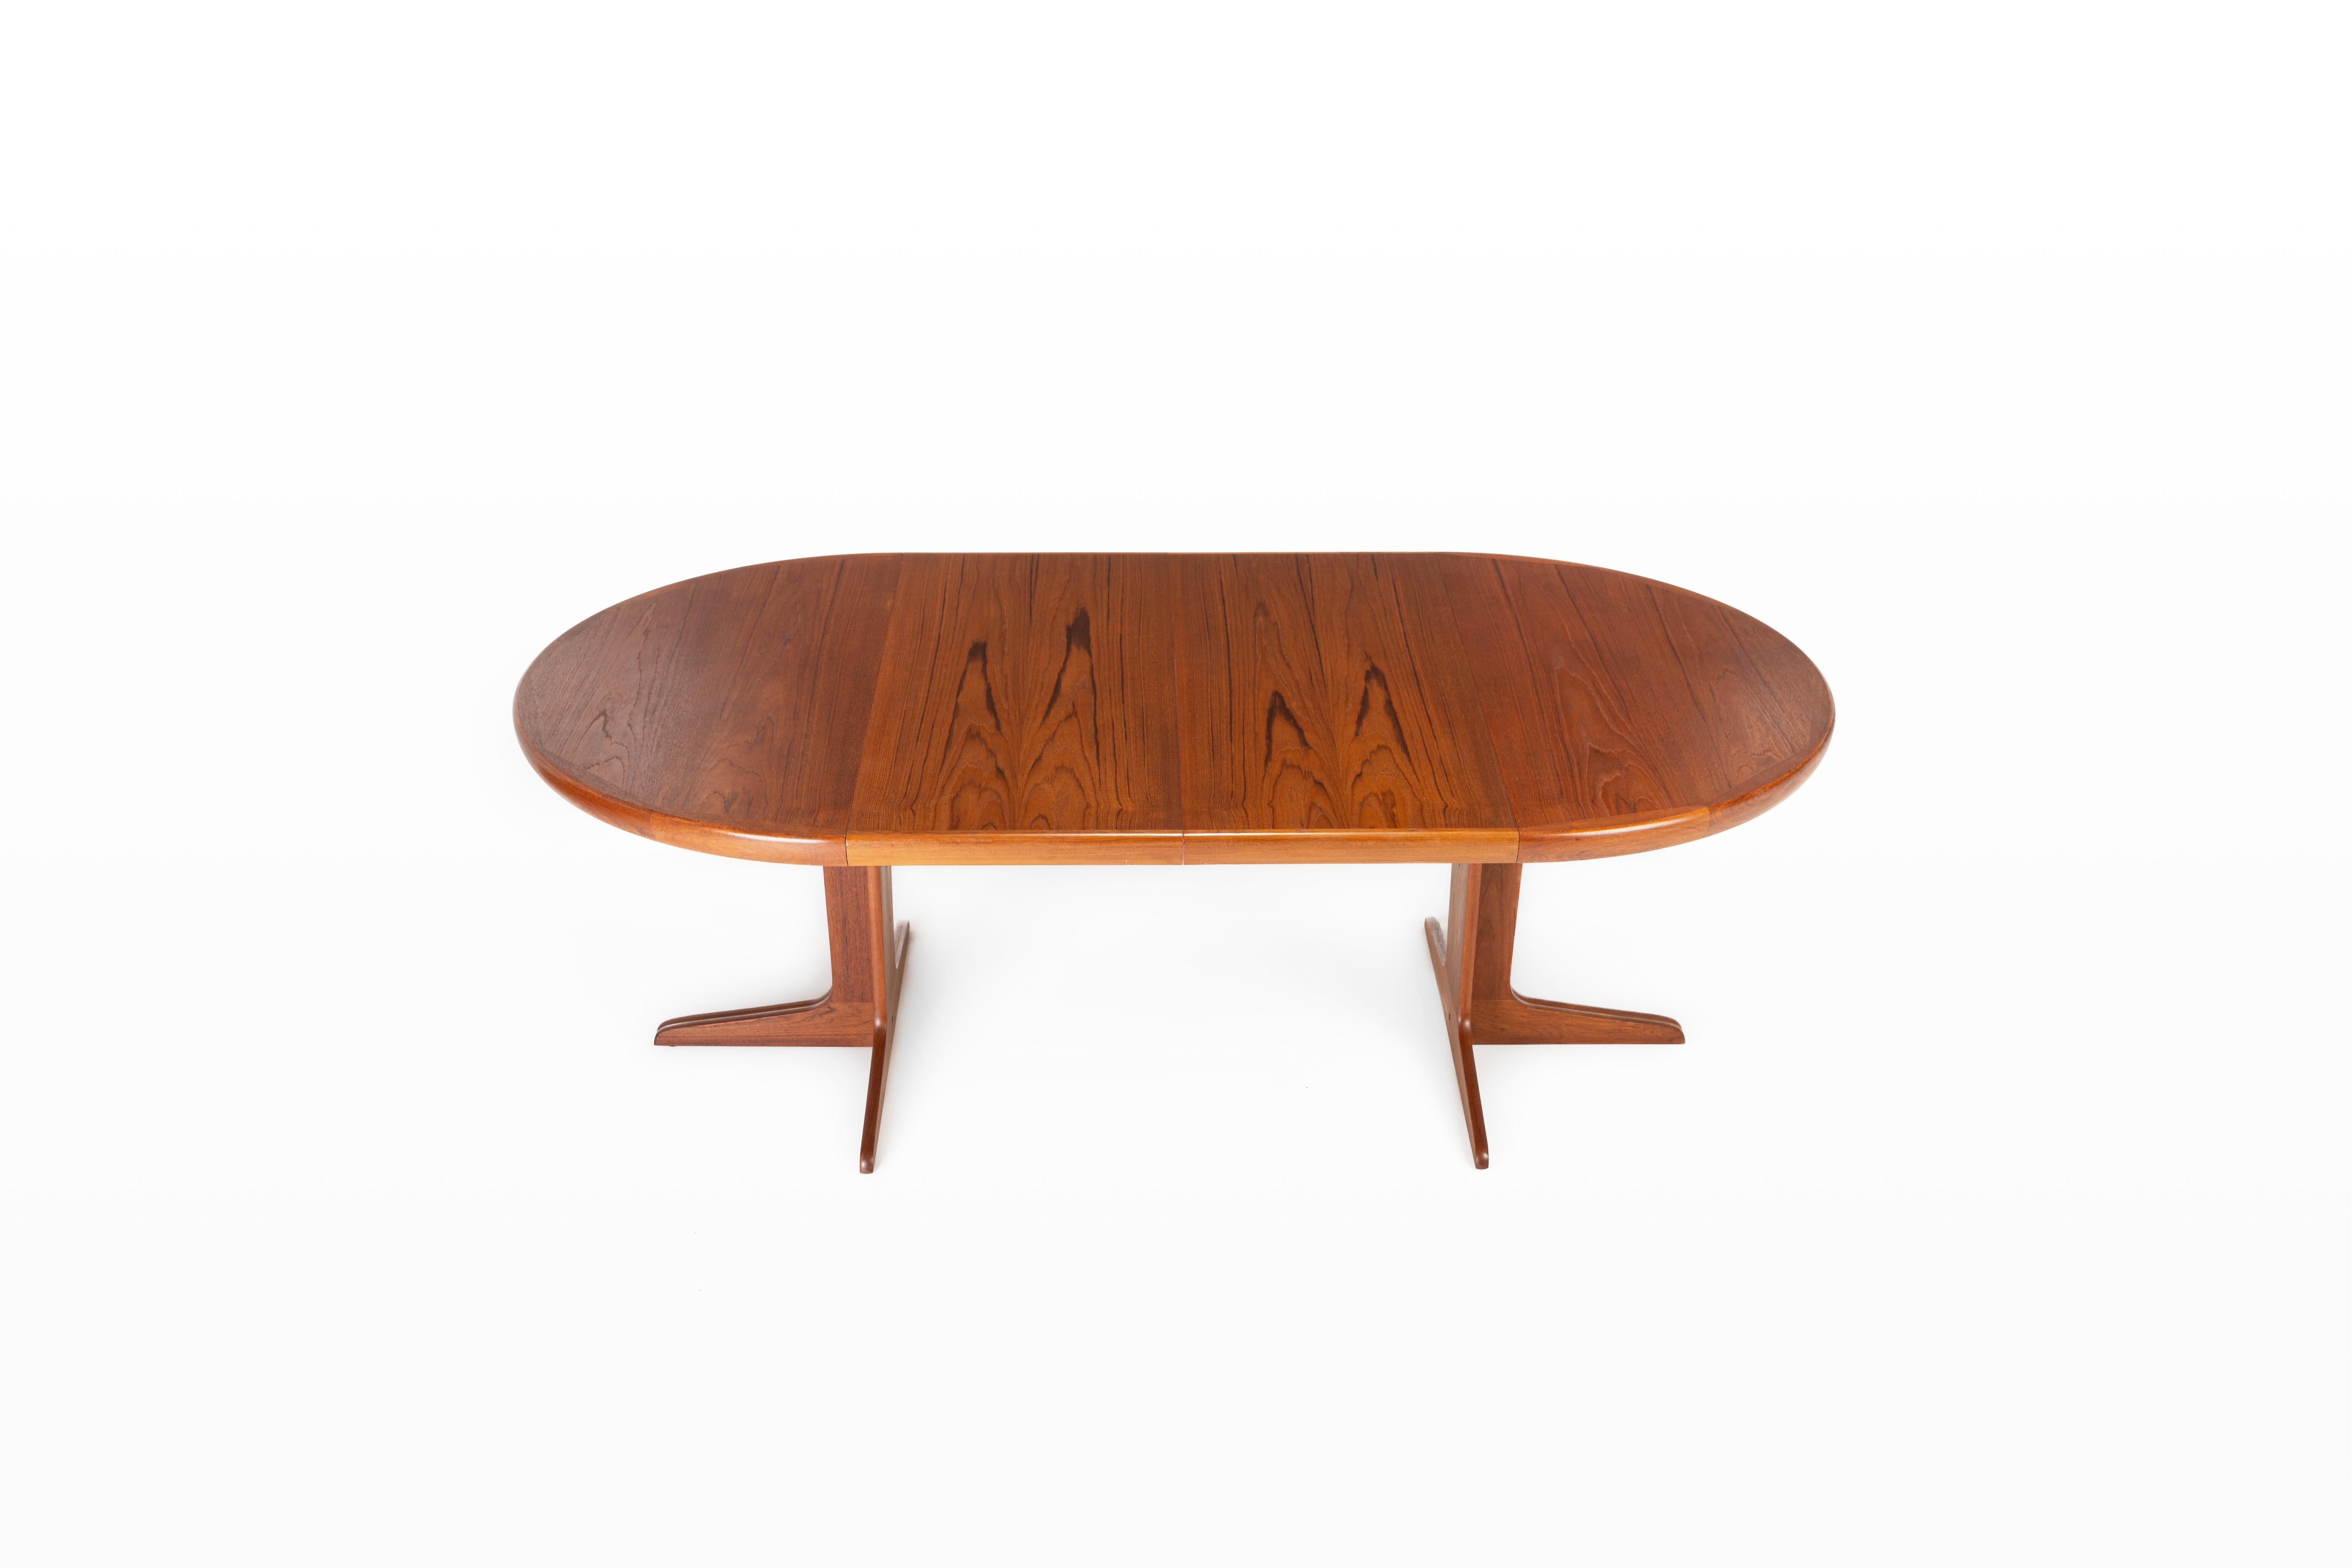 Beautiful Scandinavian round dining table manufactured by VV Møbler. This table is extendable and produced in Denmark in the 1960s. The table is made of teak wood and is in very good condition.